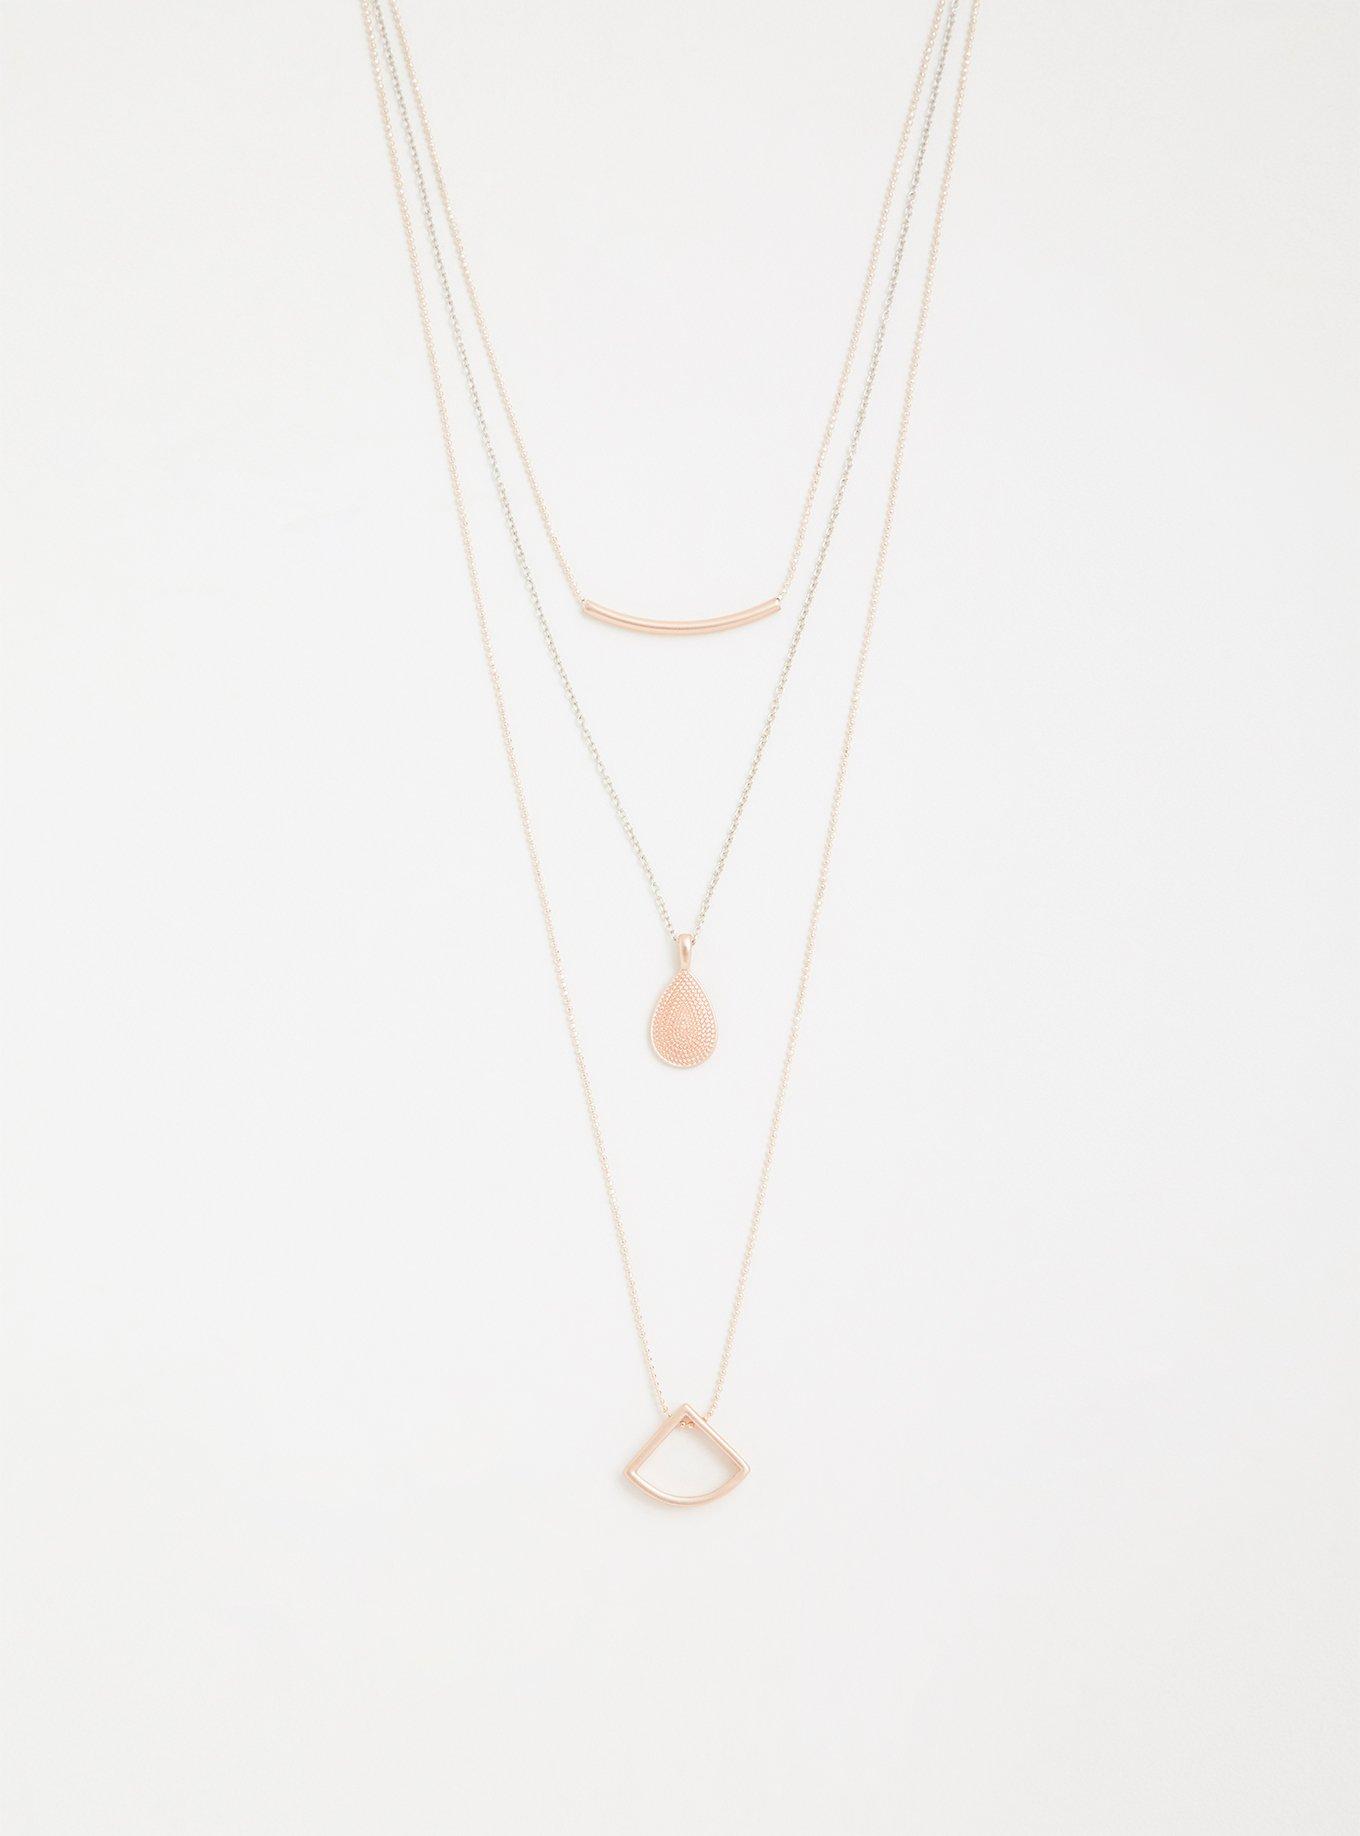 Plus Size - Rose Gold Geometric Layer Necklace - Torrid